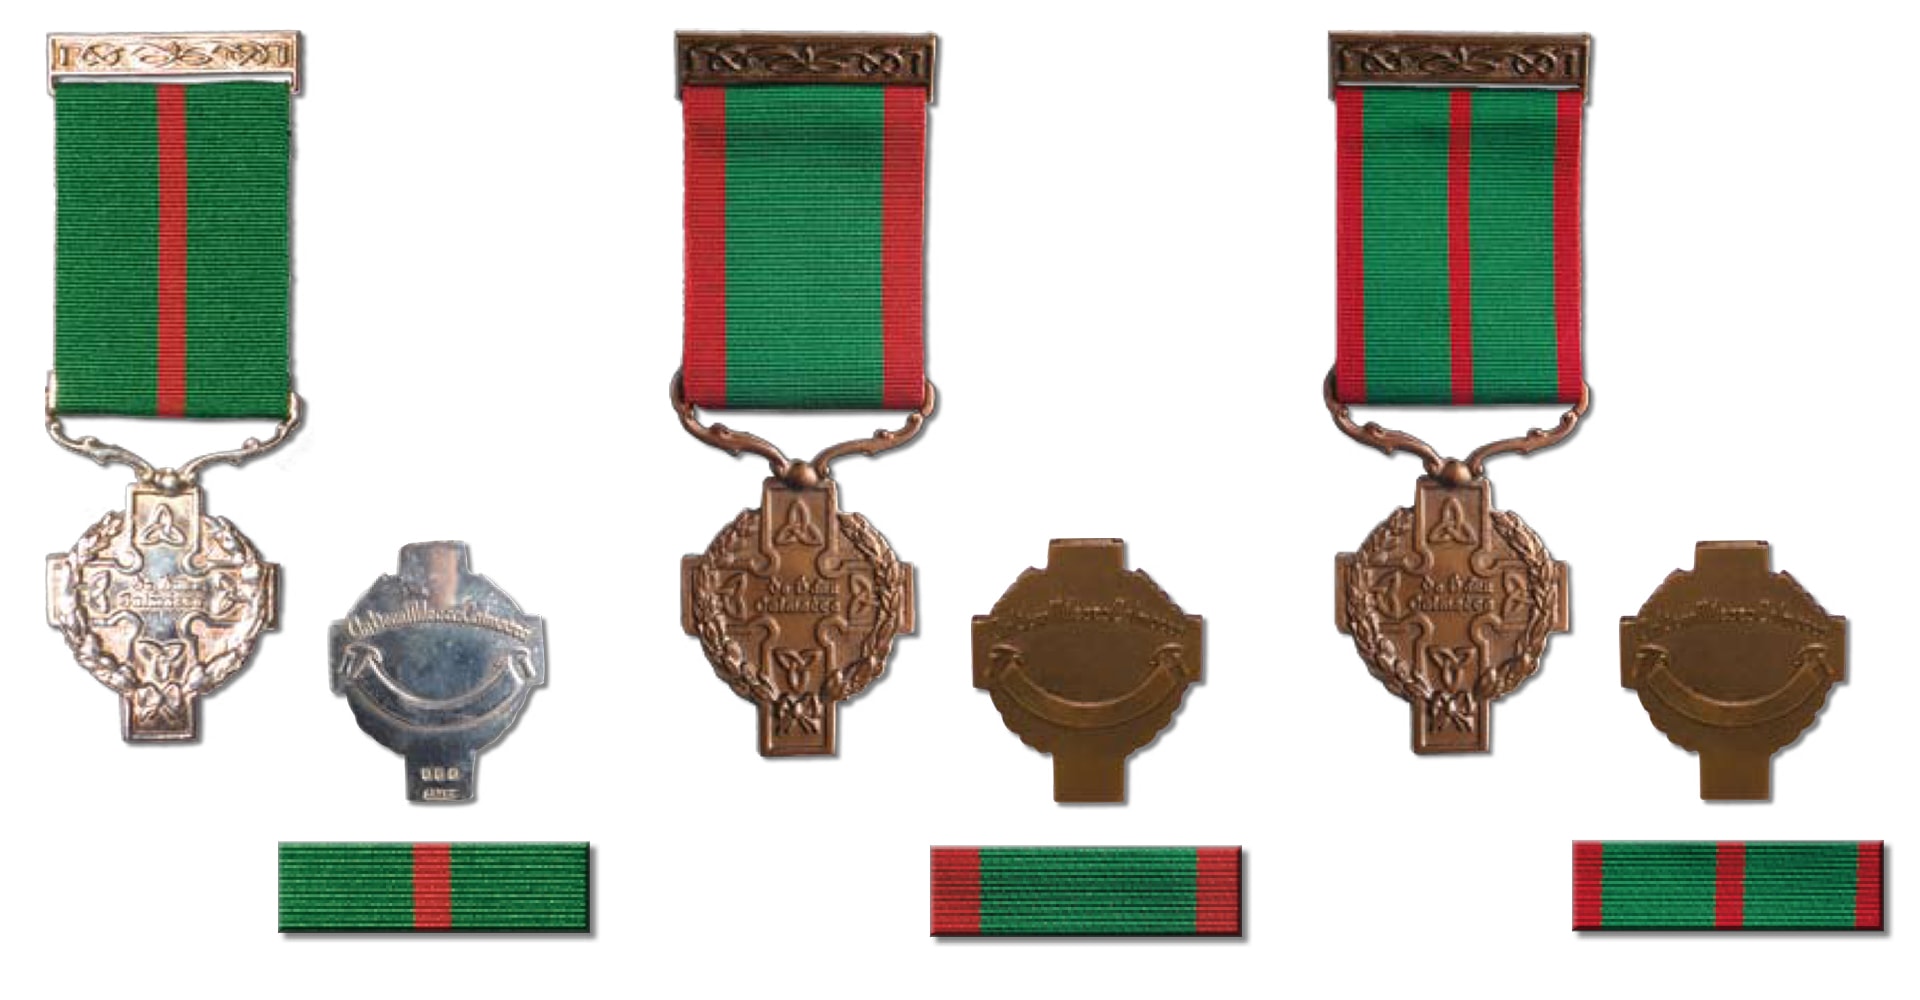 Military Medal for Gallantry (MMG)